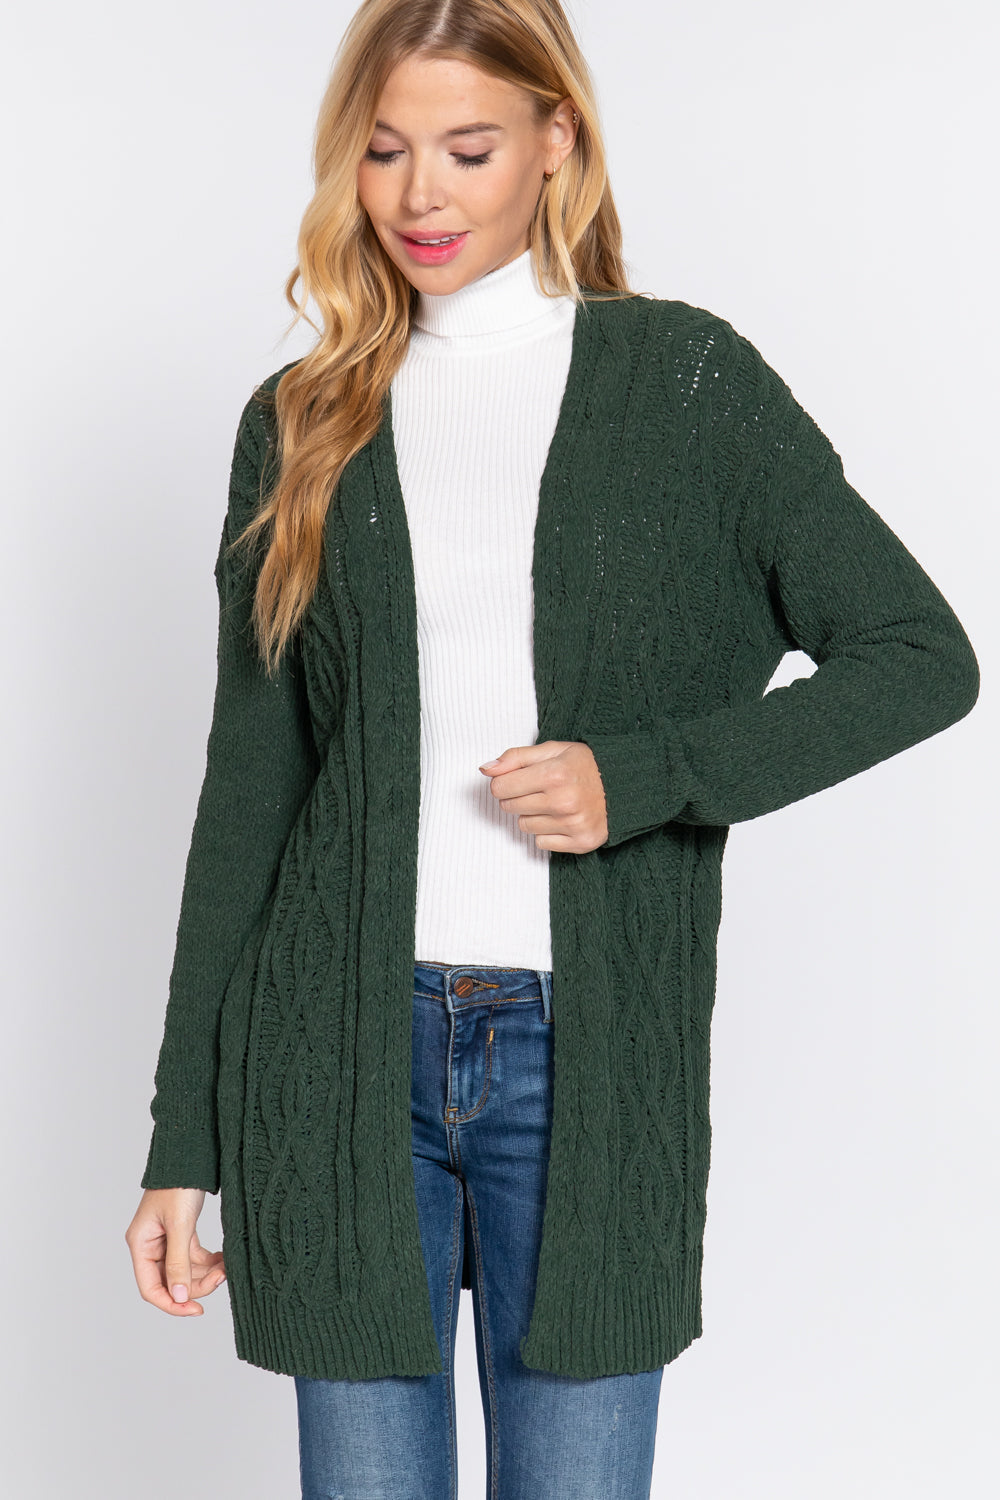 Chenille Sweater Cardigan - 3 colors - Ships from The US - women's cardigan at TFC&H Co.